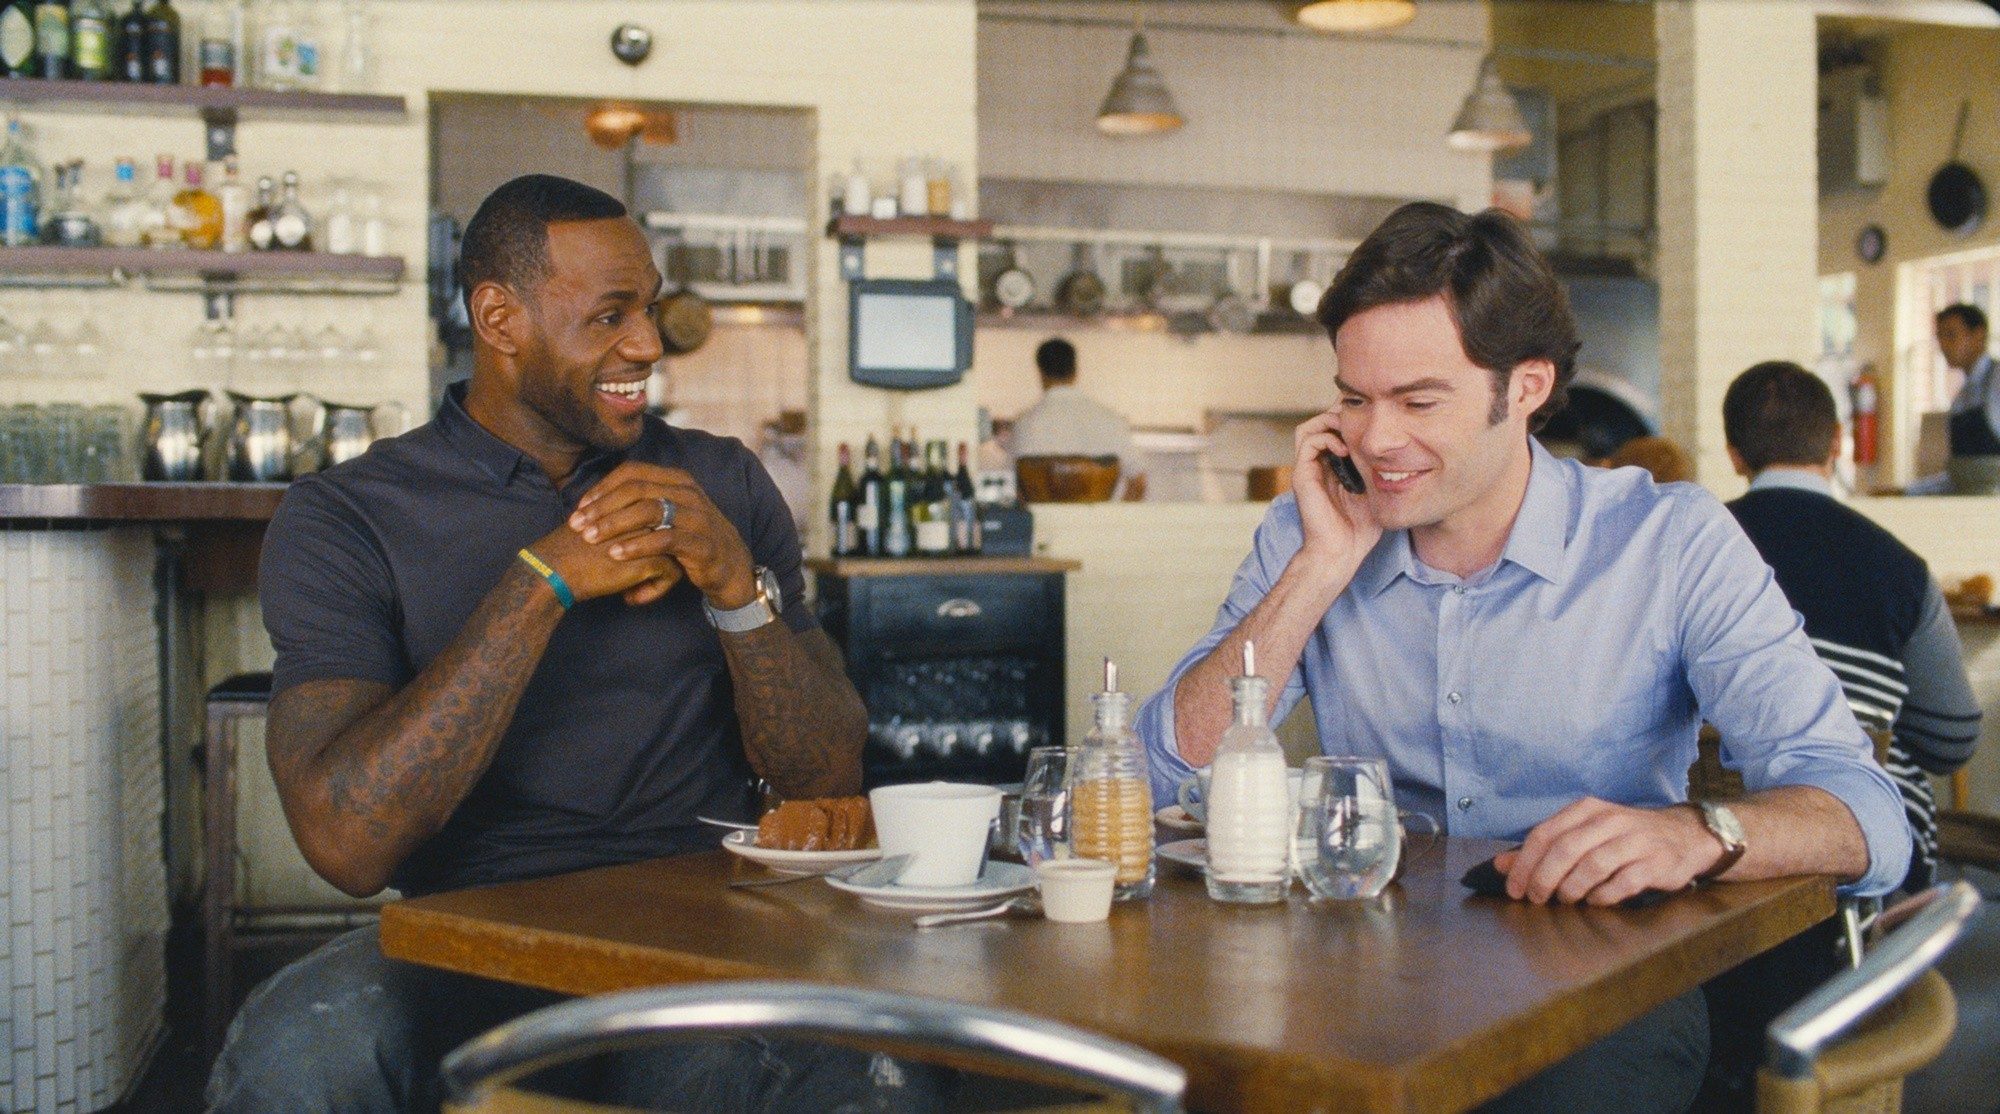 LeBron James and Bill Hader (Aaron) in Universal Pictures' Trainwreck (2015)